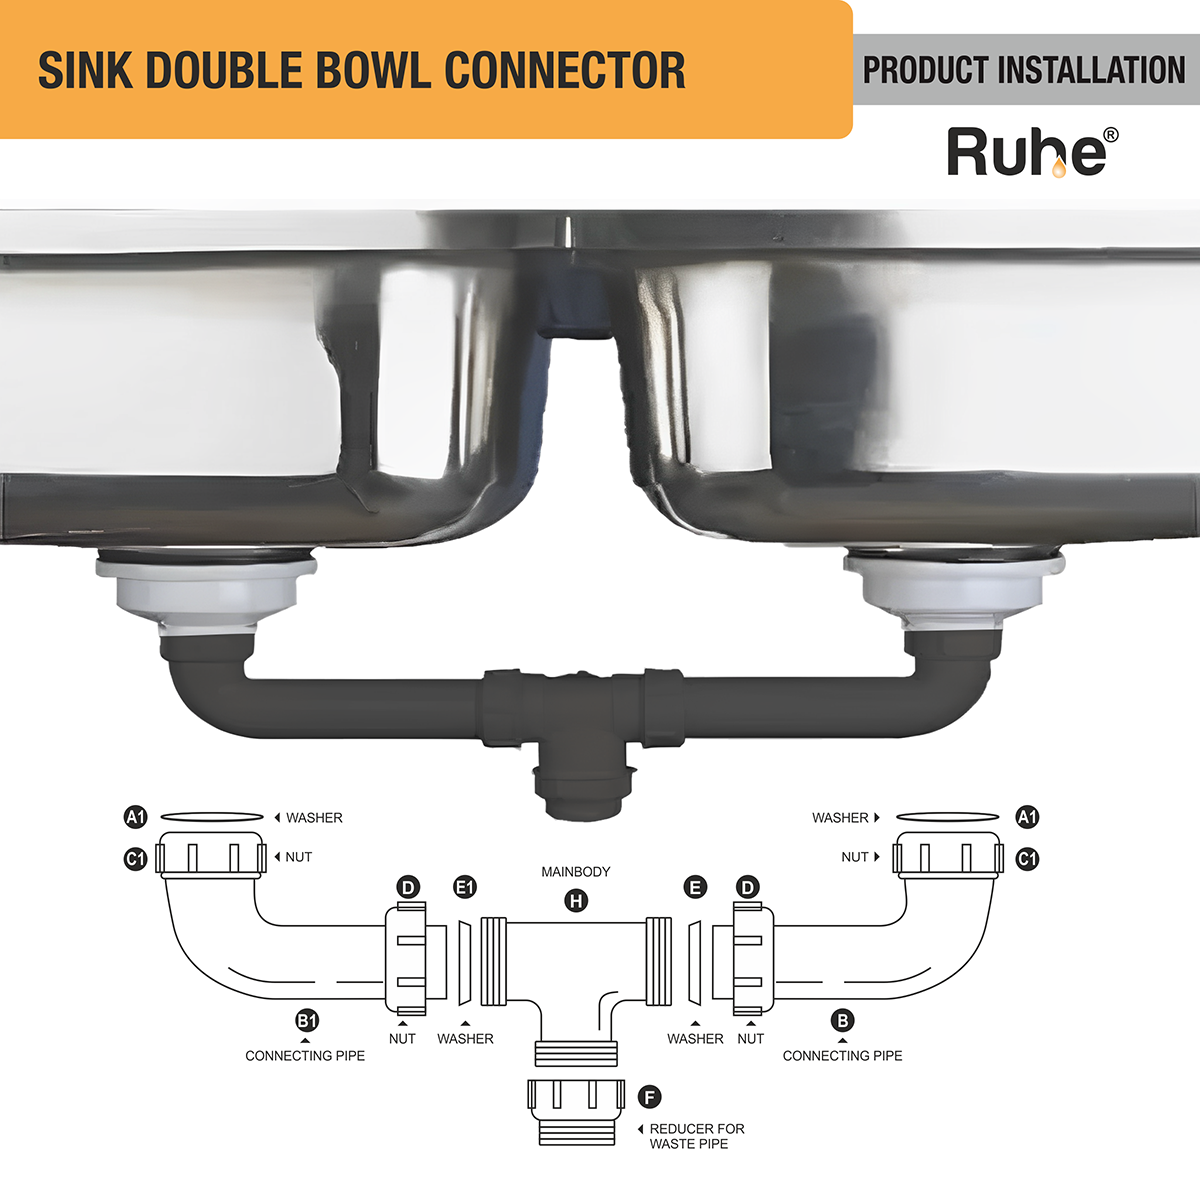 Double Bowl Connector installation process